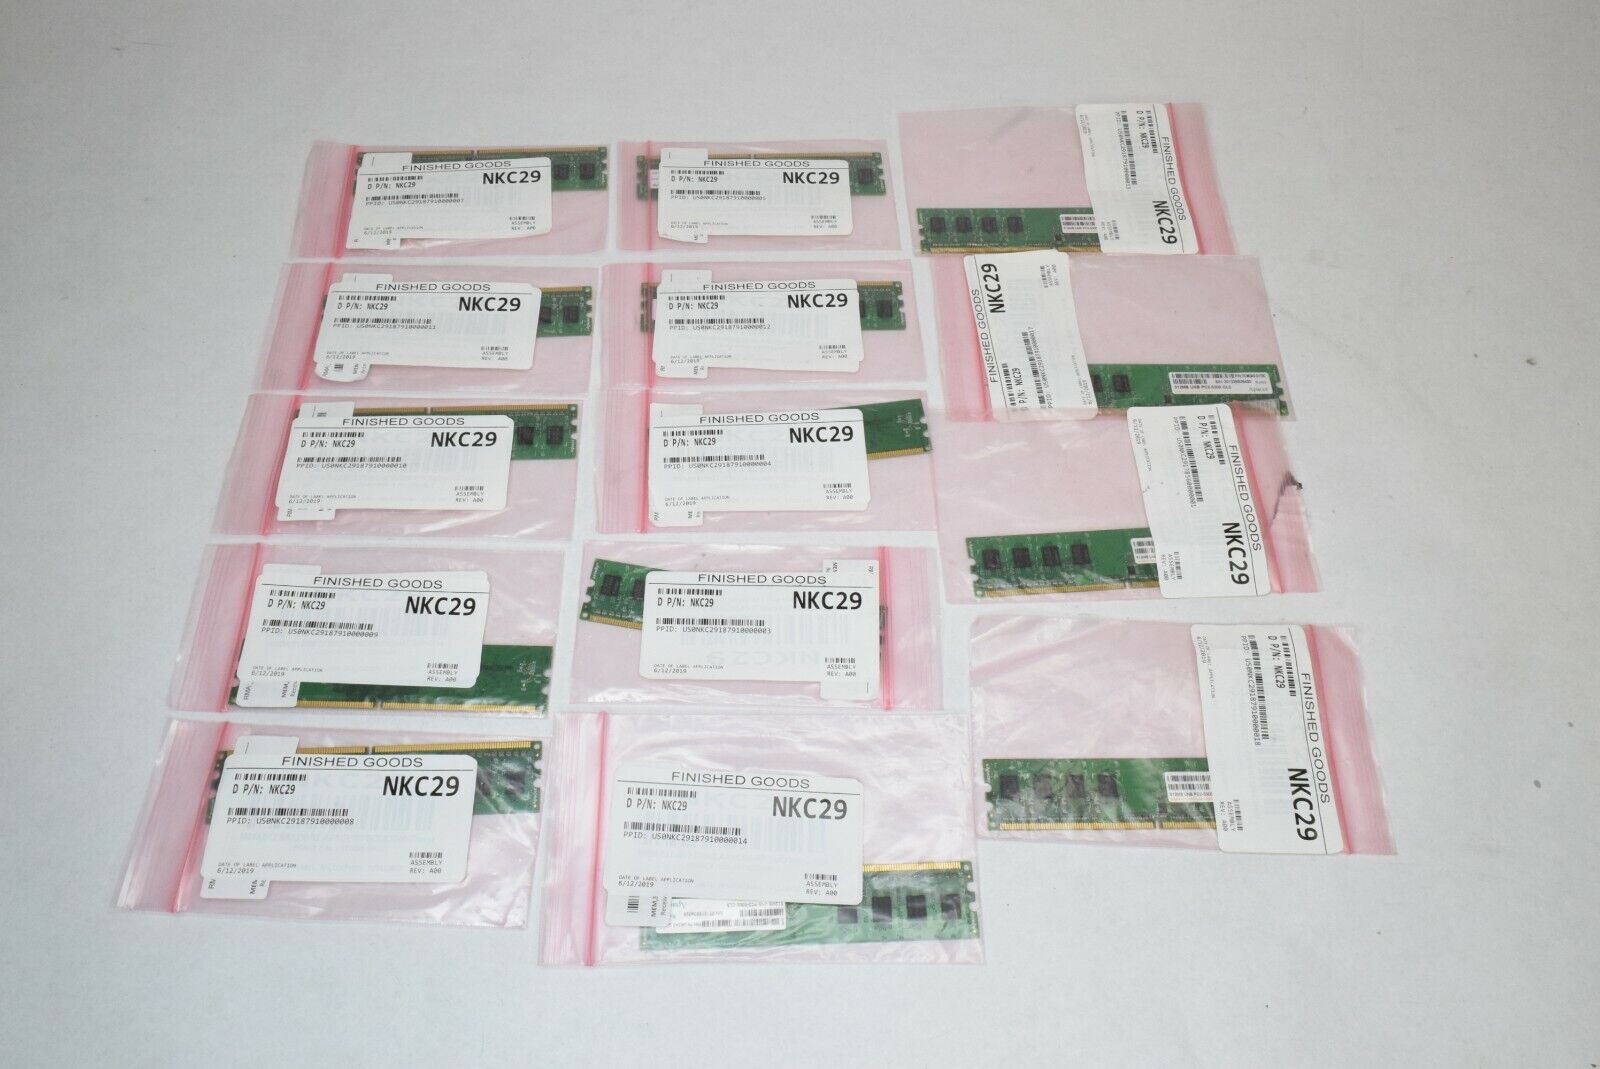 Apacer 512MB PC2-5300 DDR2-667MHz non-ECC CL5 240-Pin DIMM Memory - Lot of 14